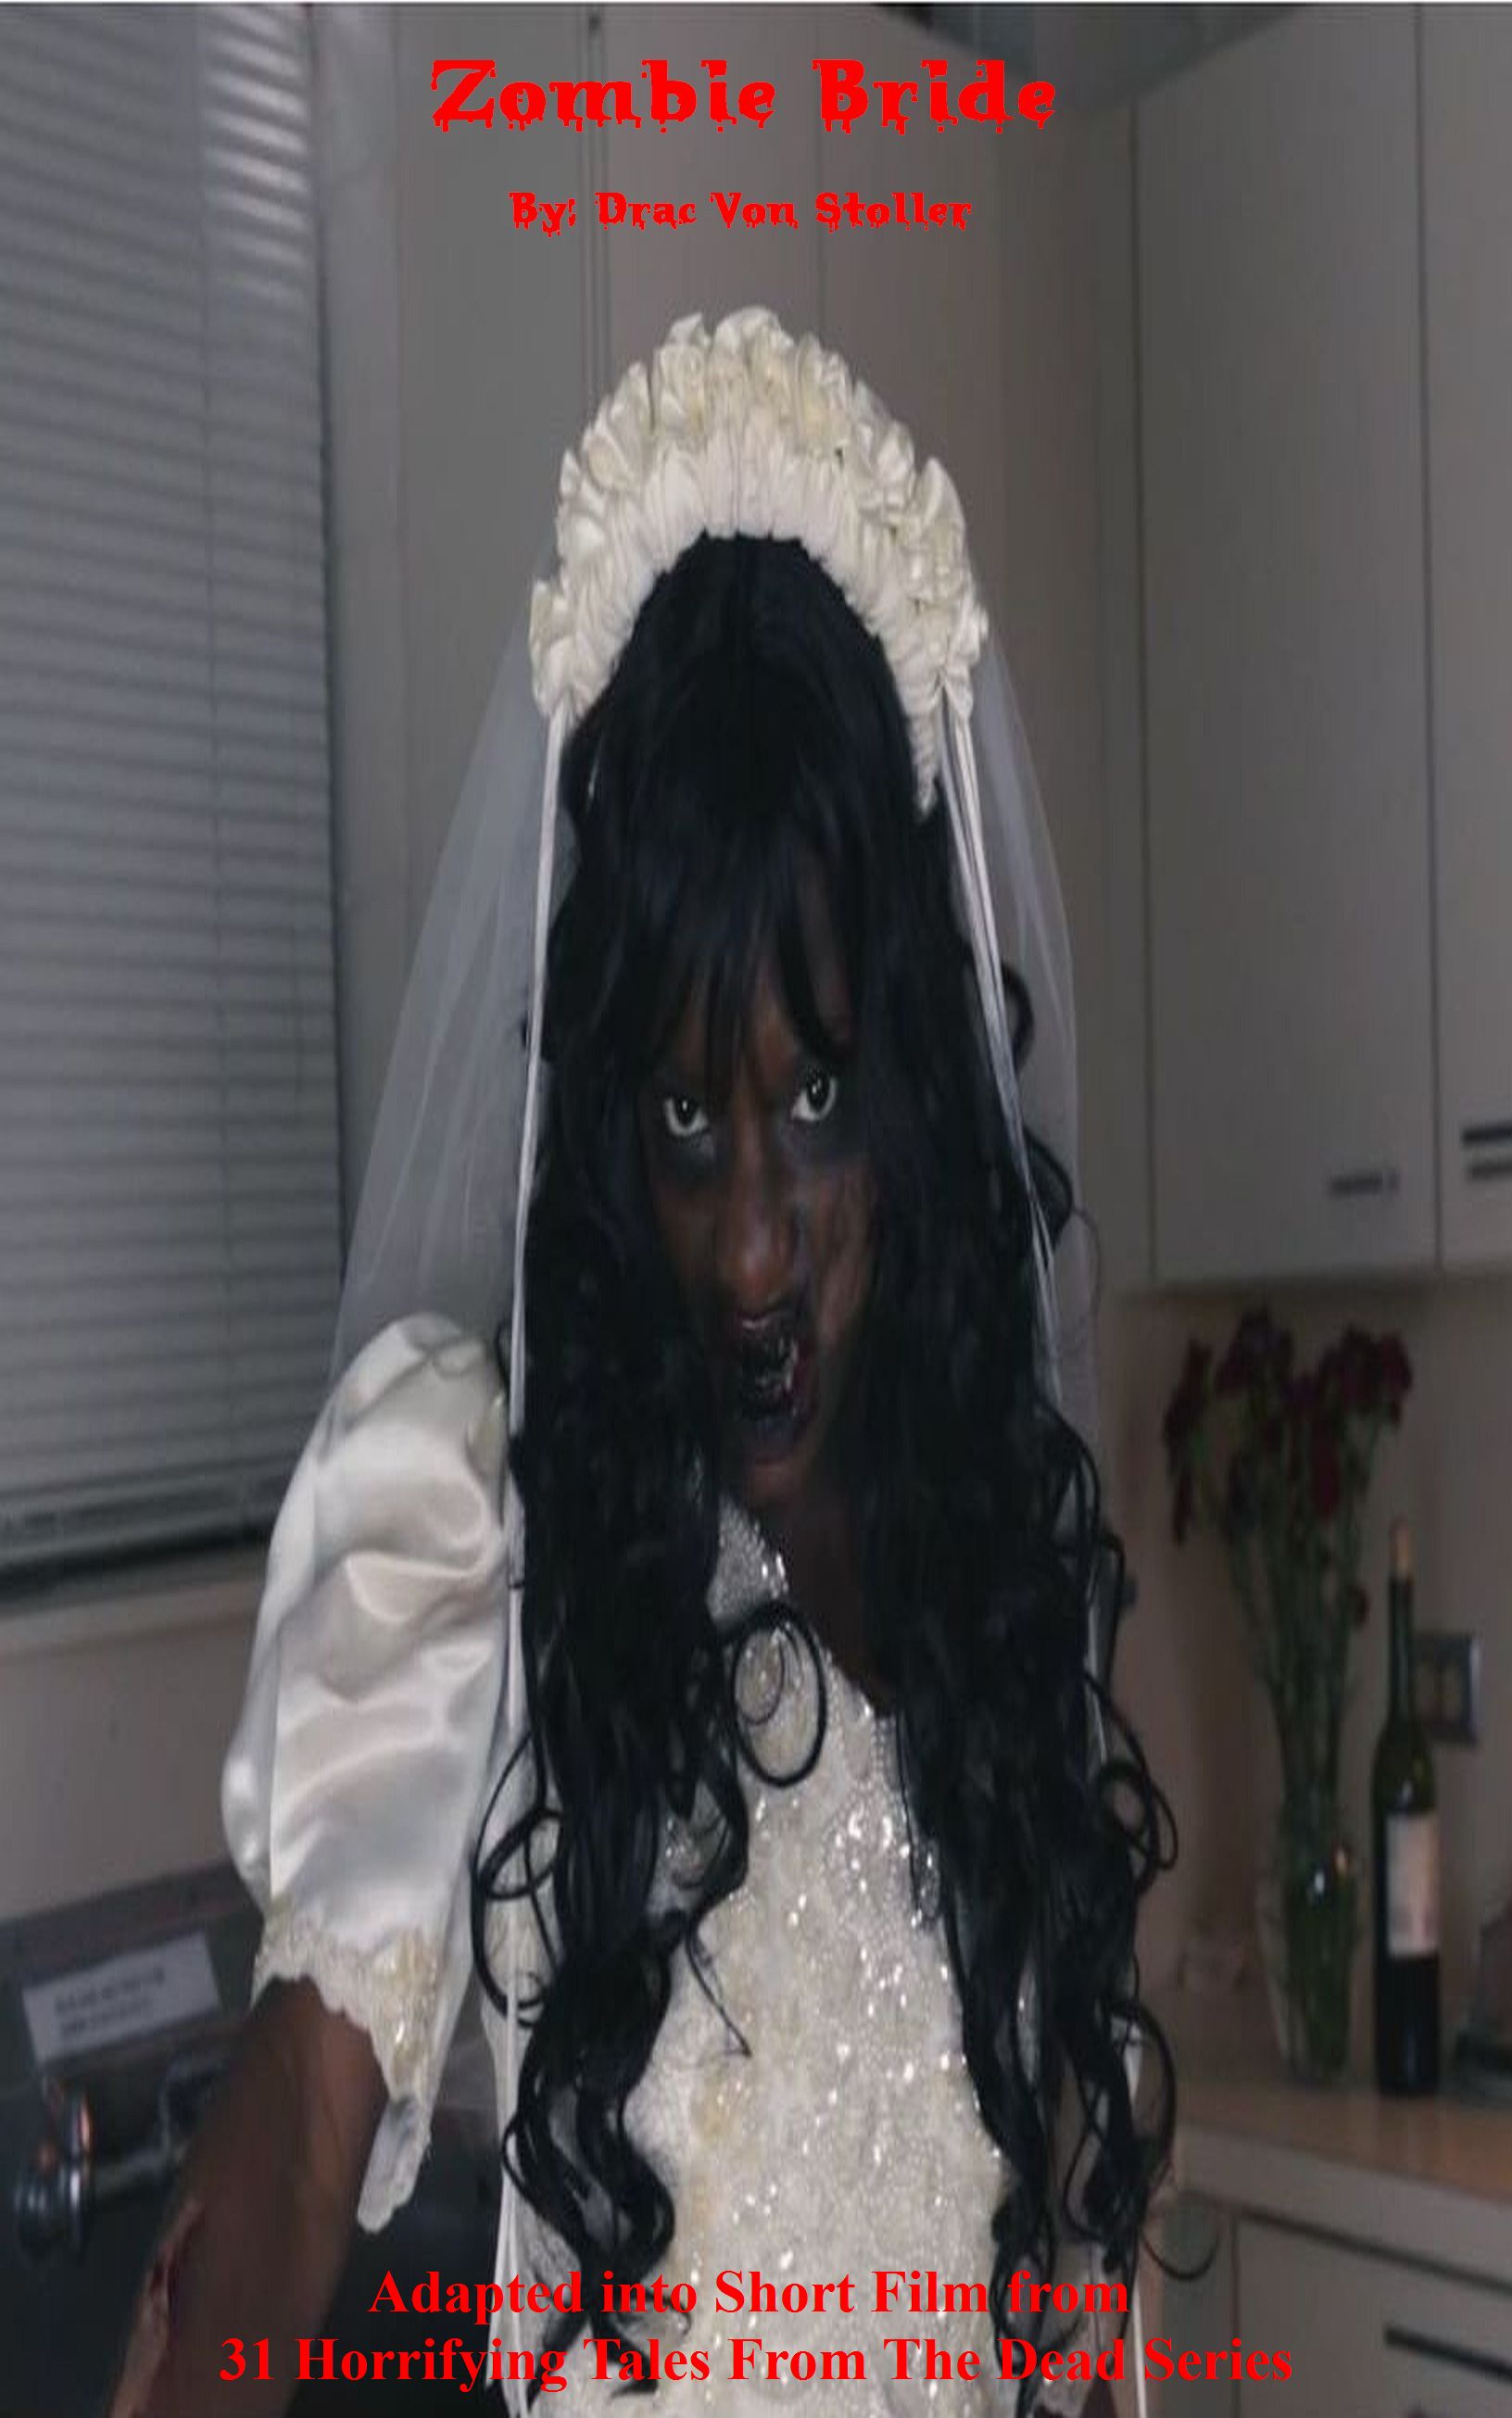 Zombie Bride short story was adapted into a short film from Drac Von Stoller's 31 Horrifying Tales From The Dead Series